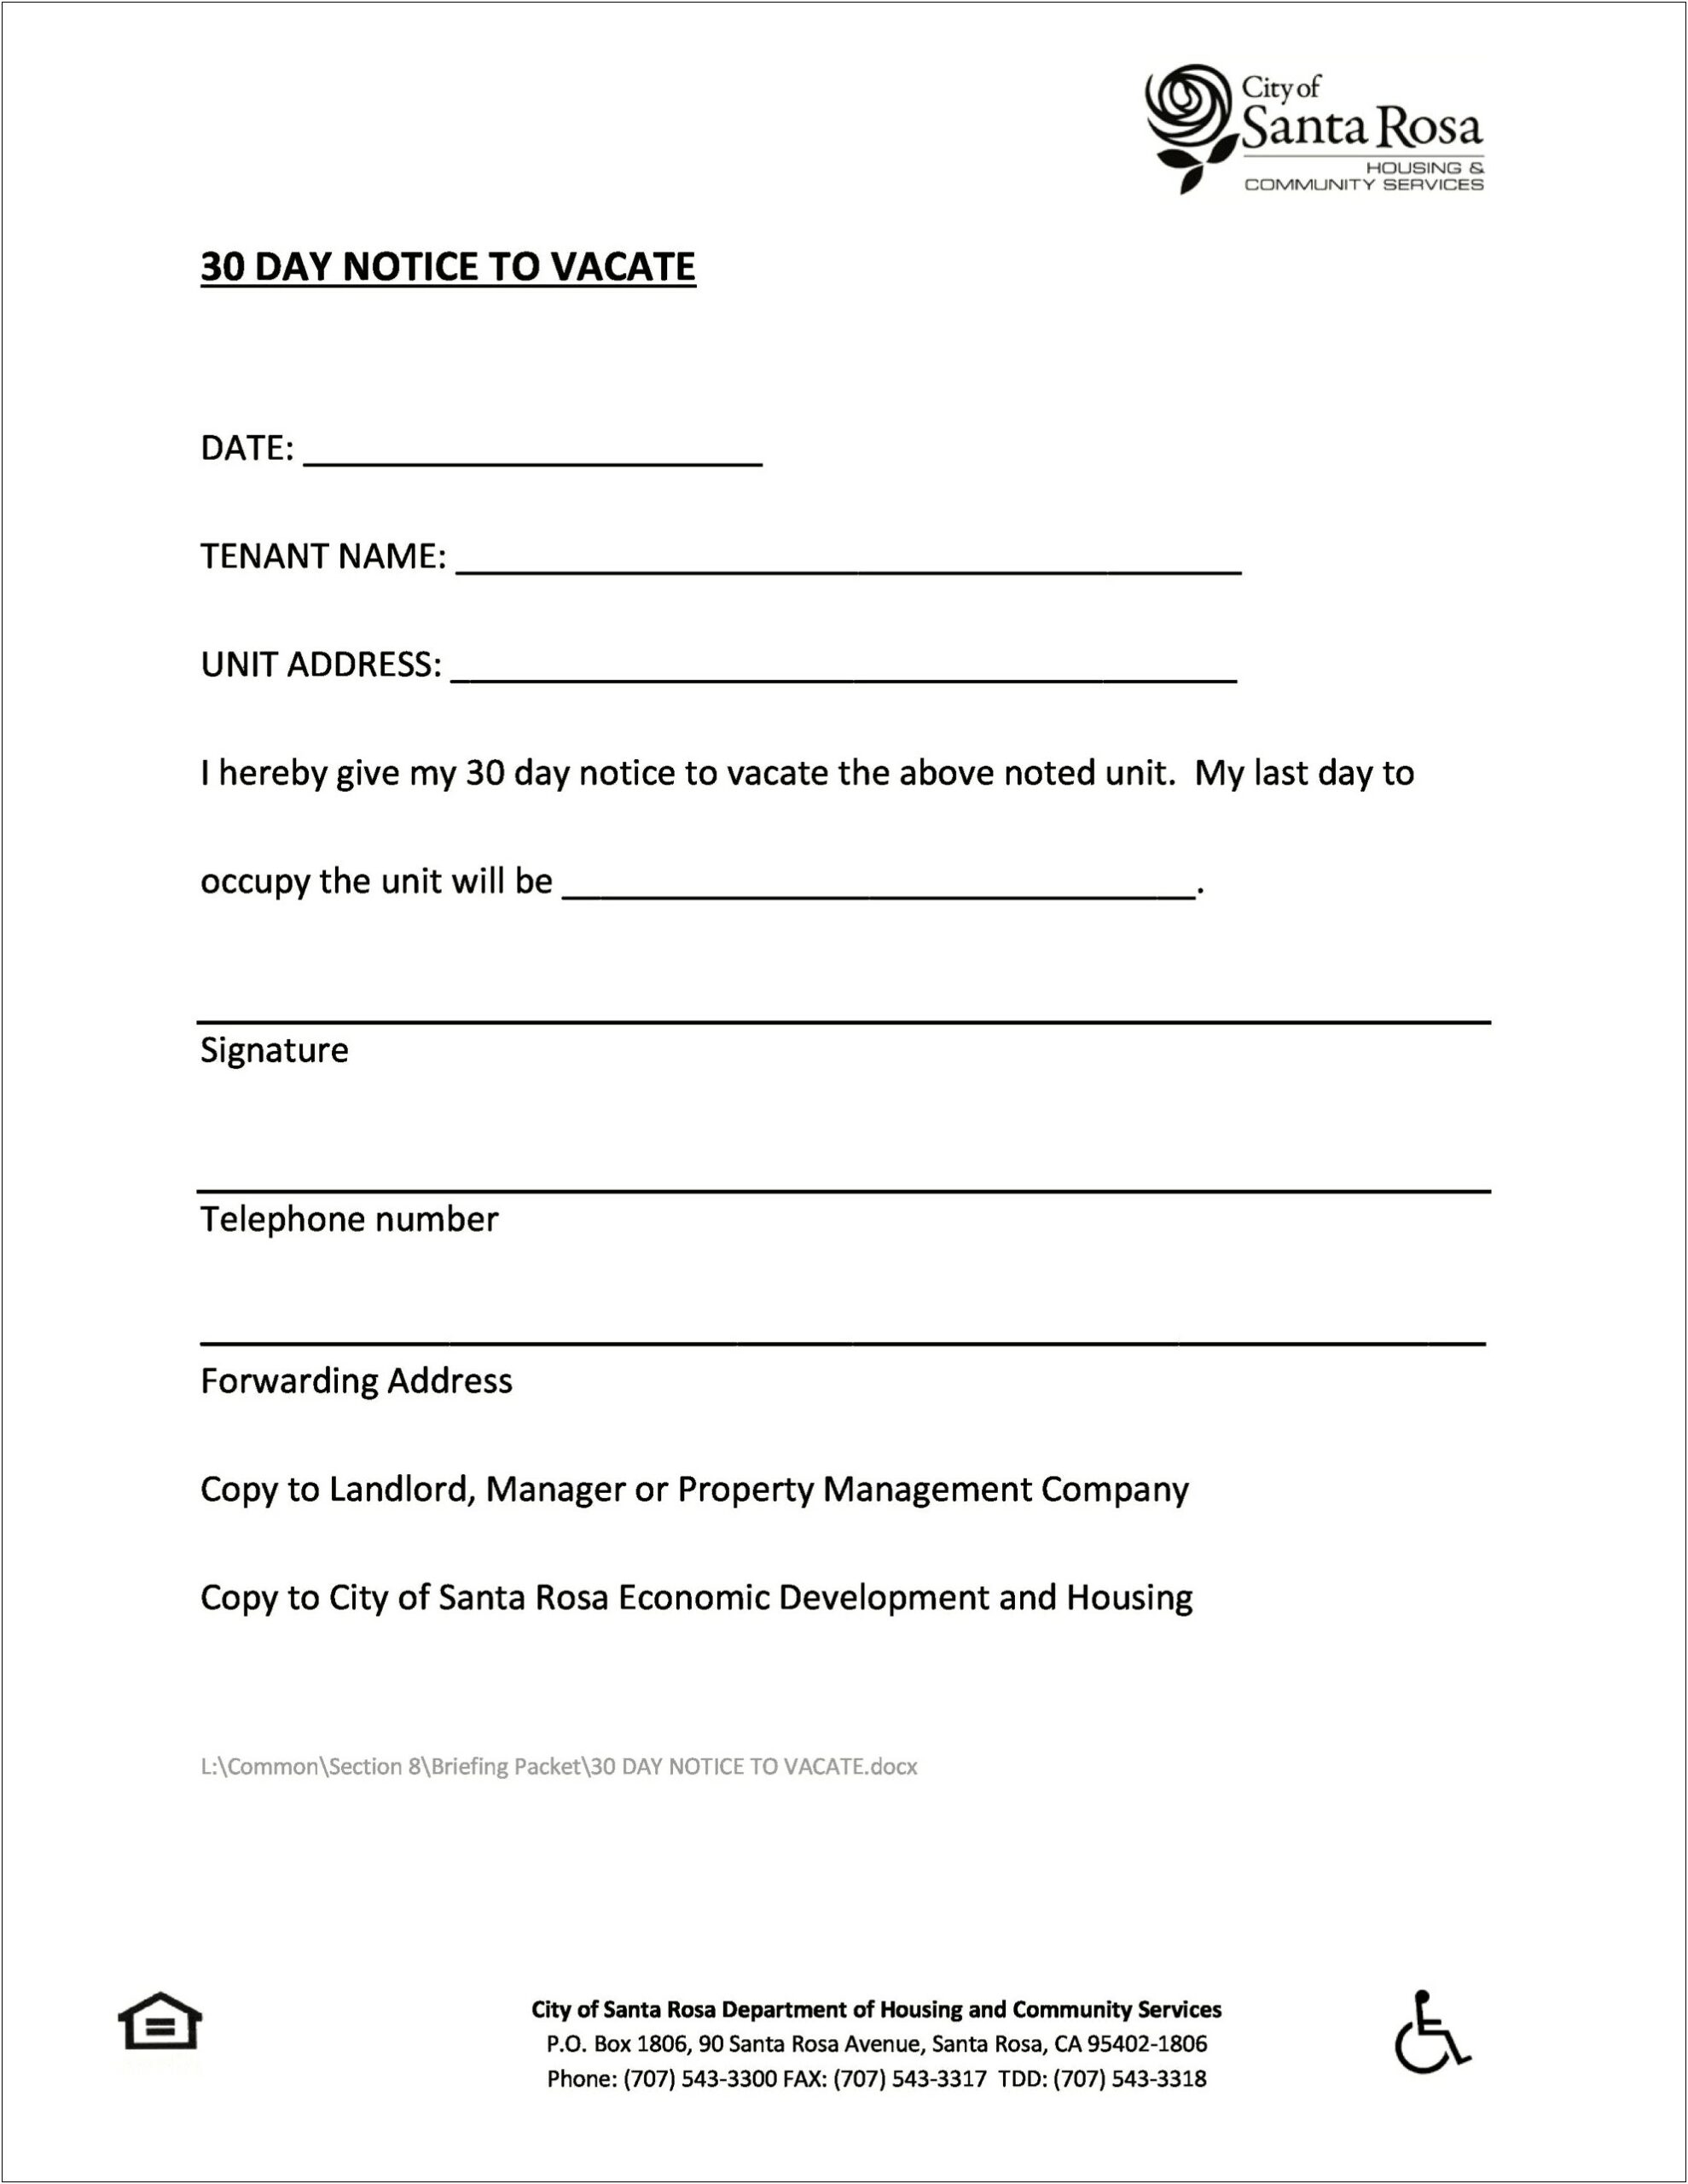 30 Day Notice To Landlord Free Template Templates : Resume Designs #